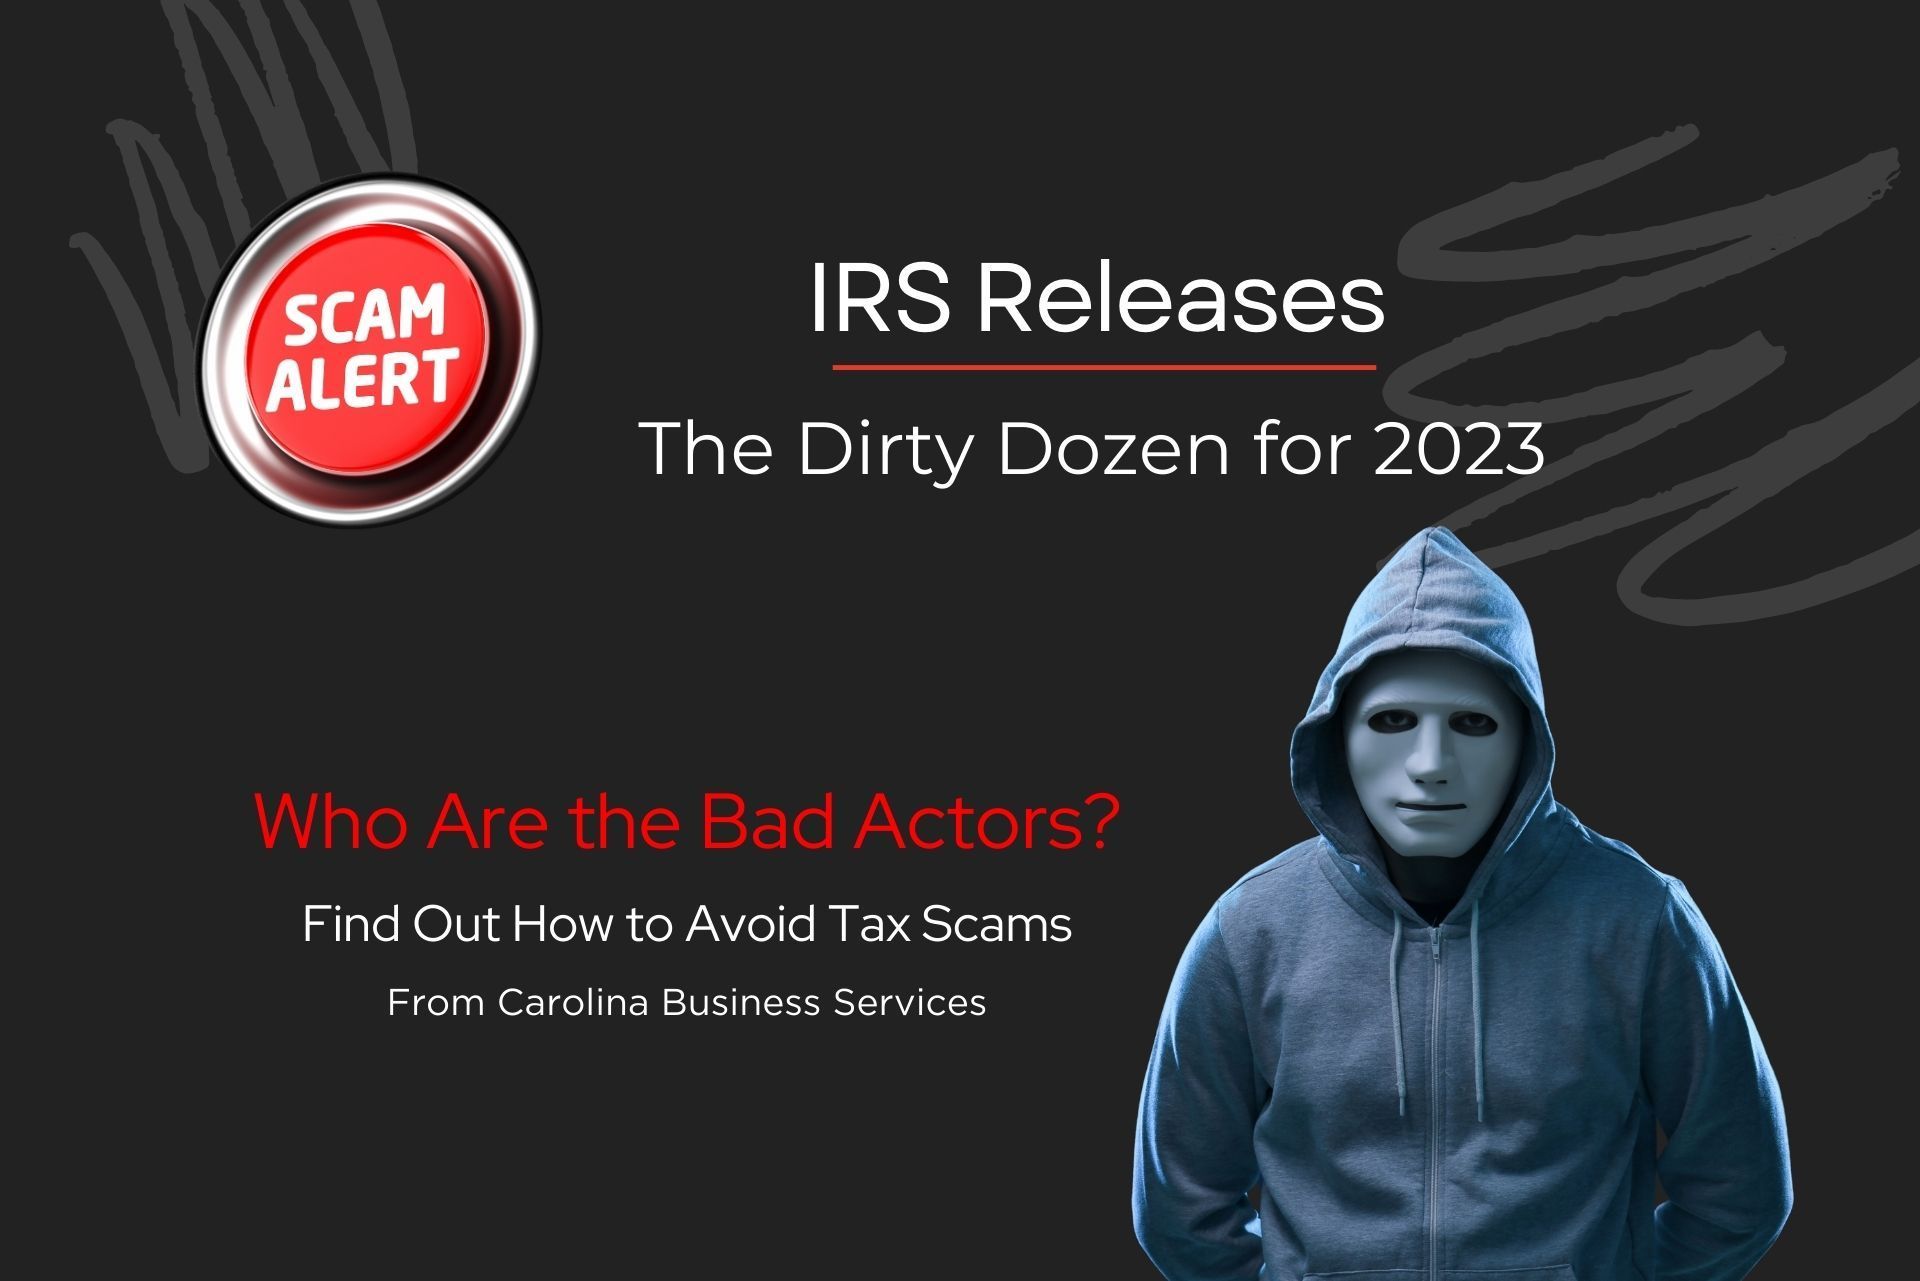 The IRS Dirty Dozen Tax Scams Released